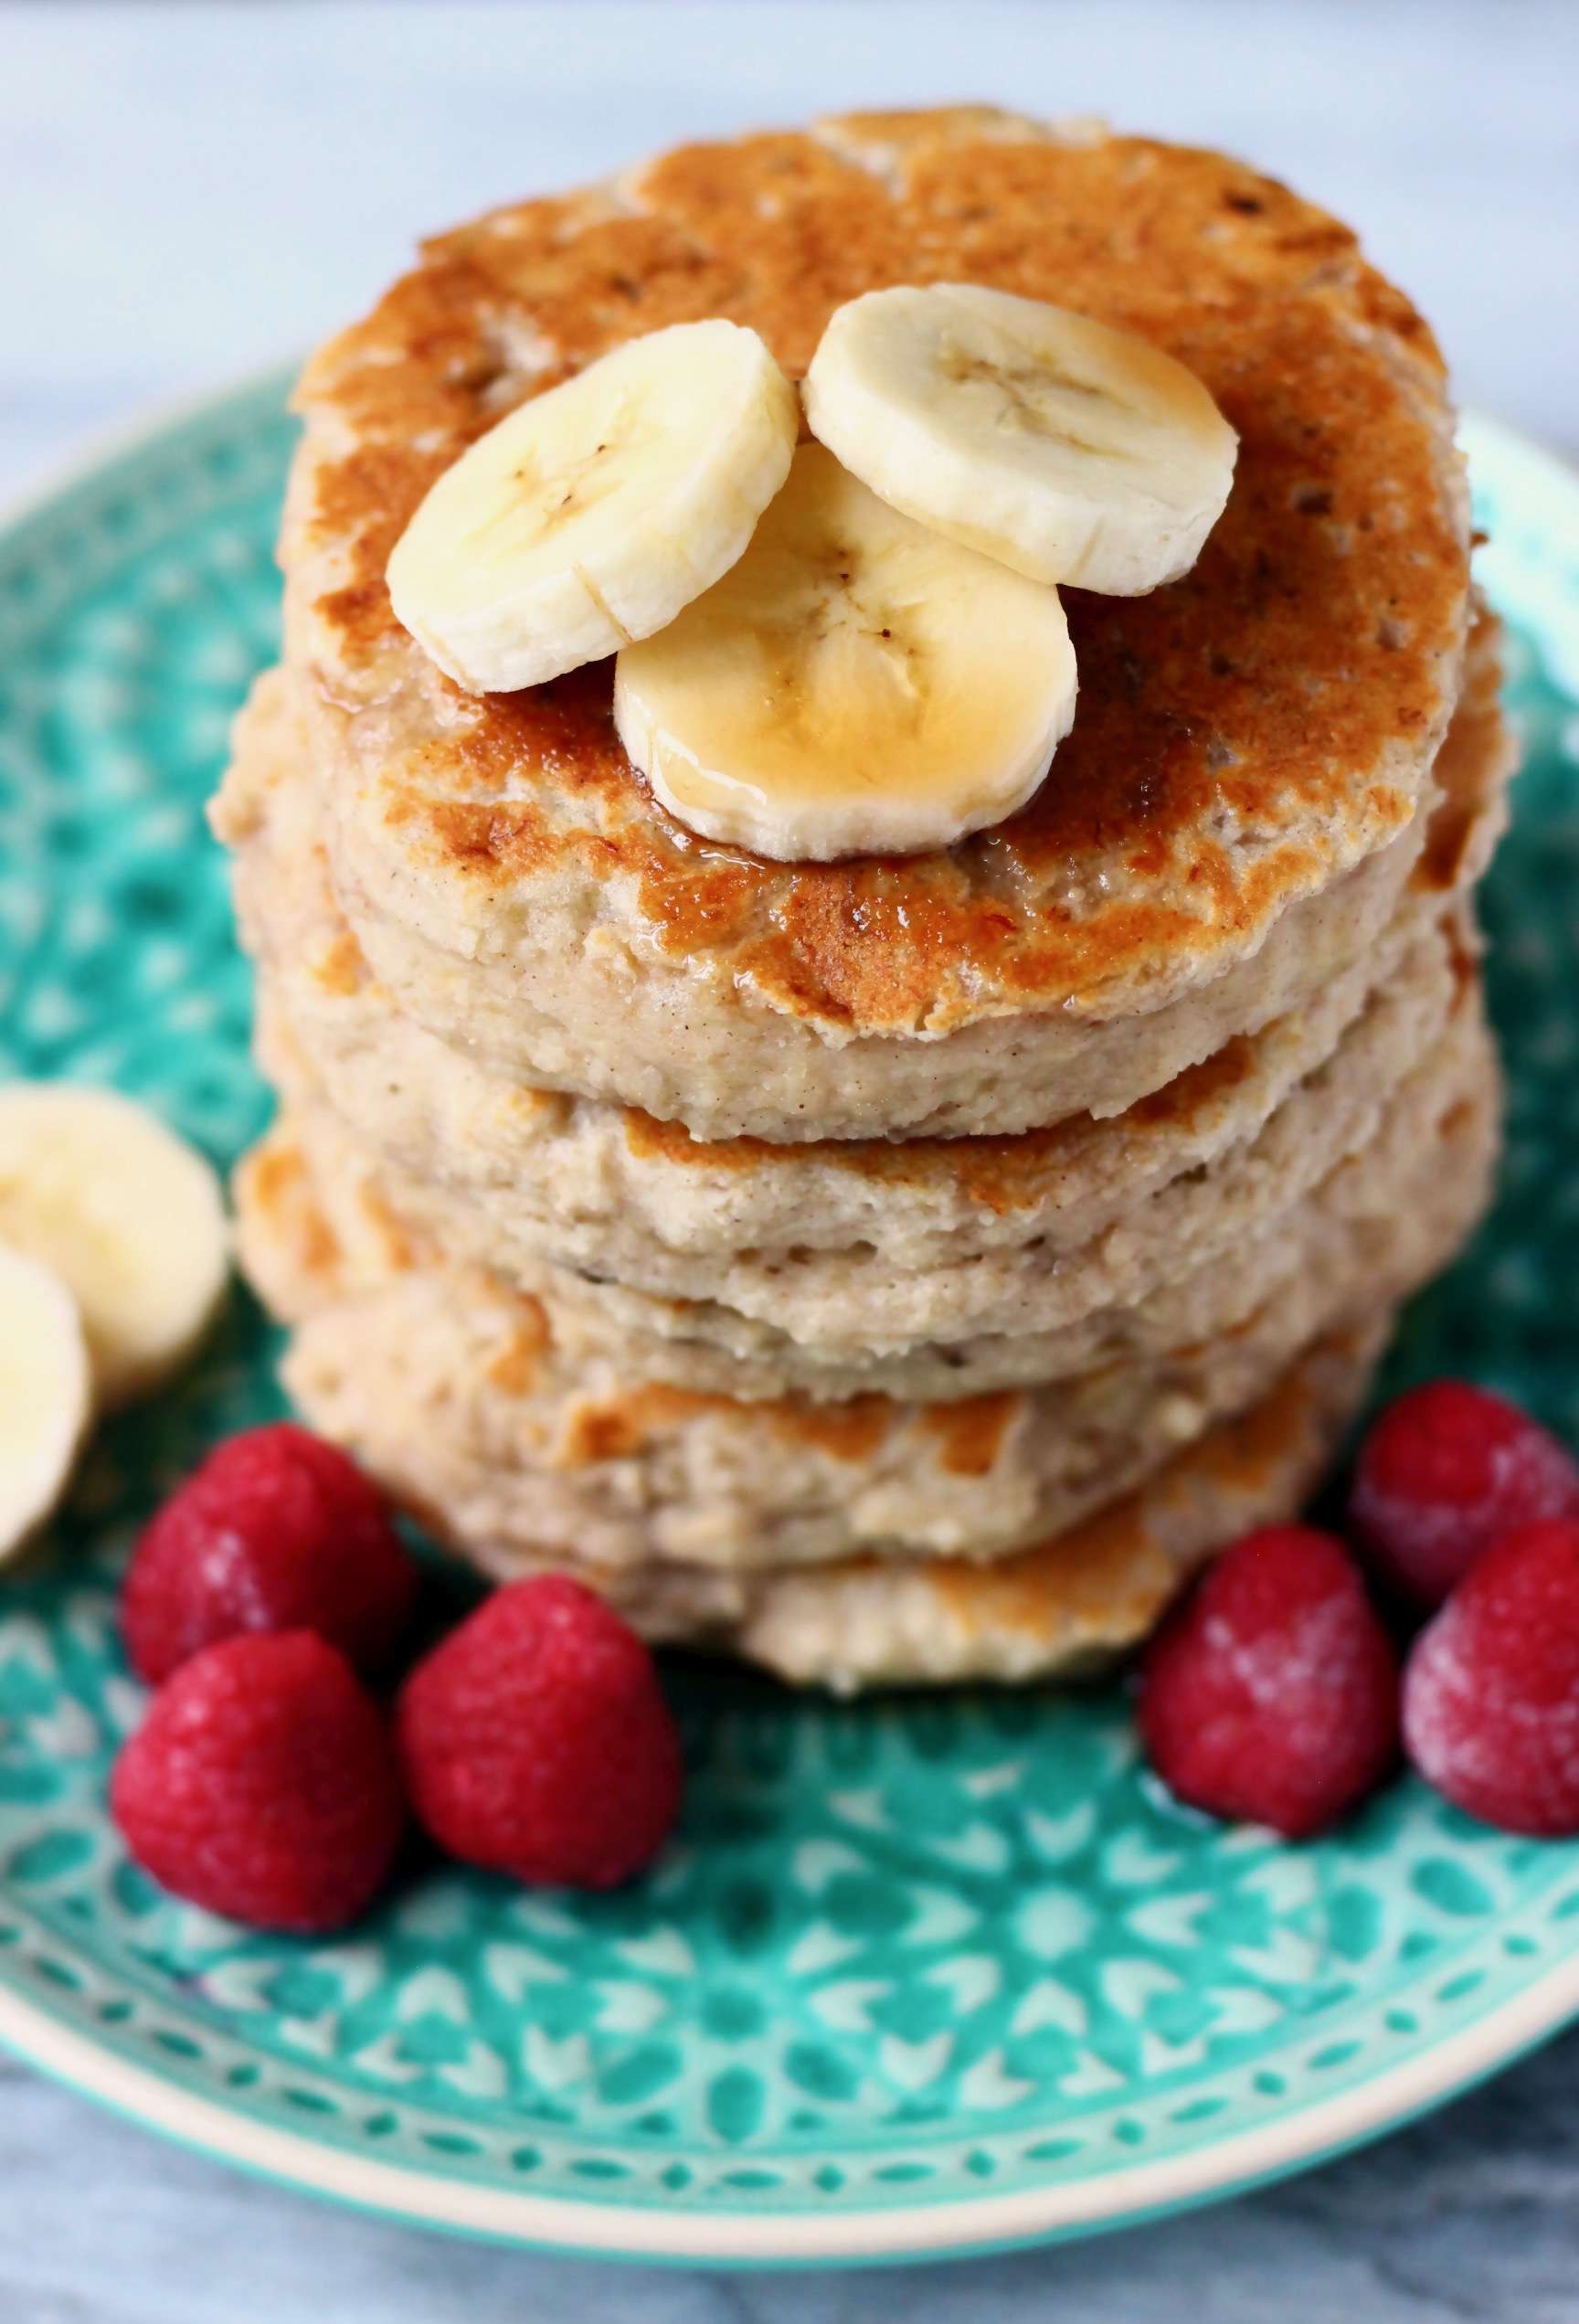 Stack of five banana pancakes topped with banana slices on top on a green plate with raspberries against a marble background